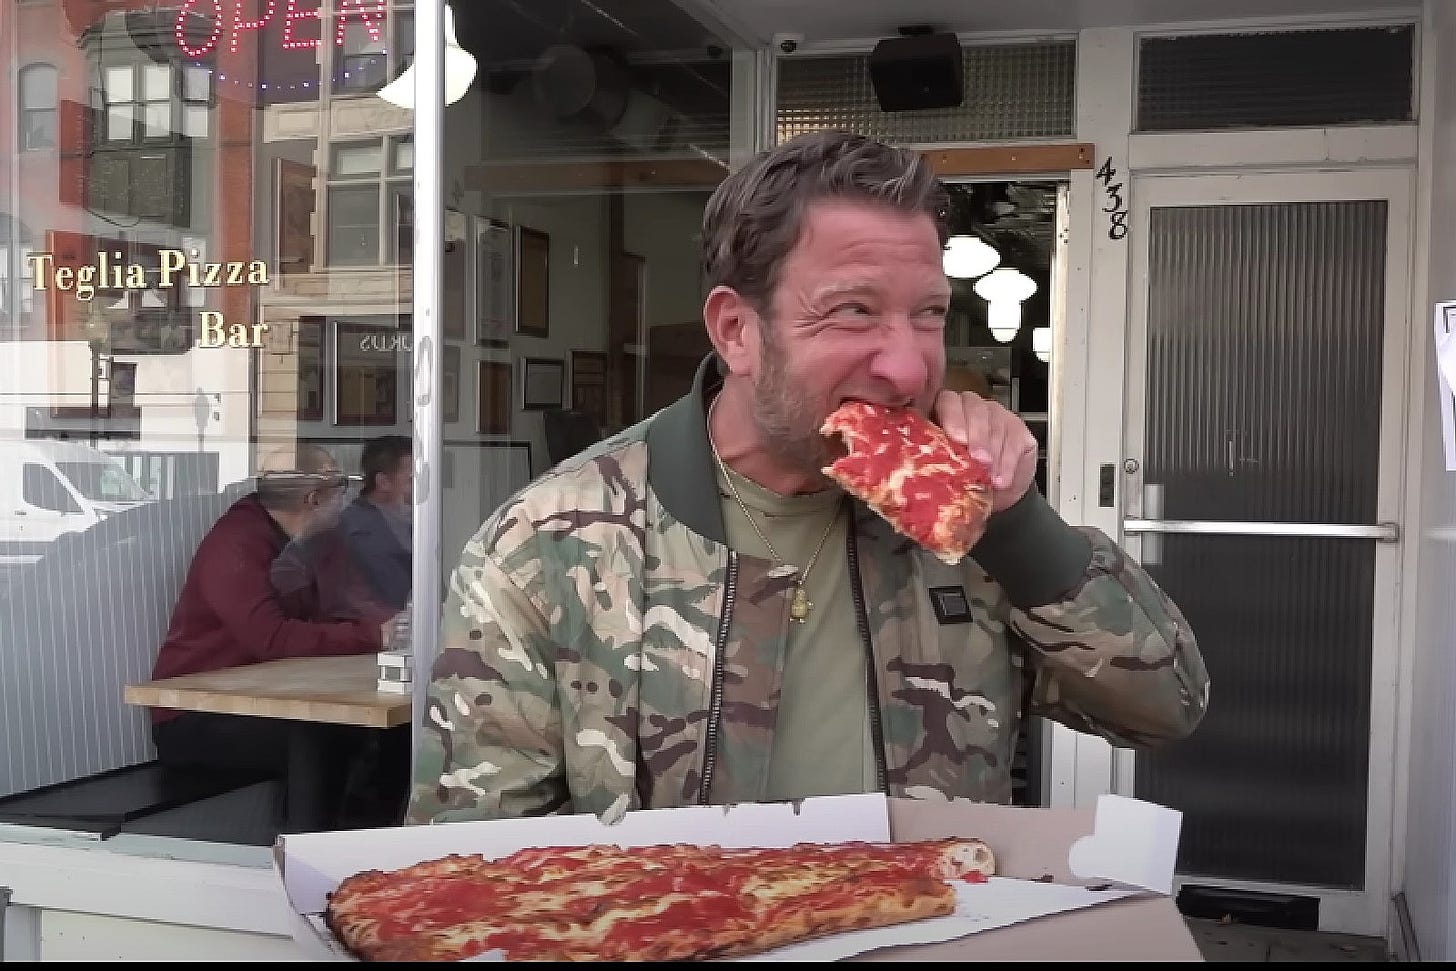 Barstool Sport's Dave Portnoy stops by two NJ pizza joints